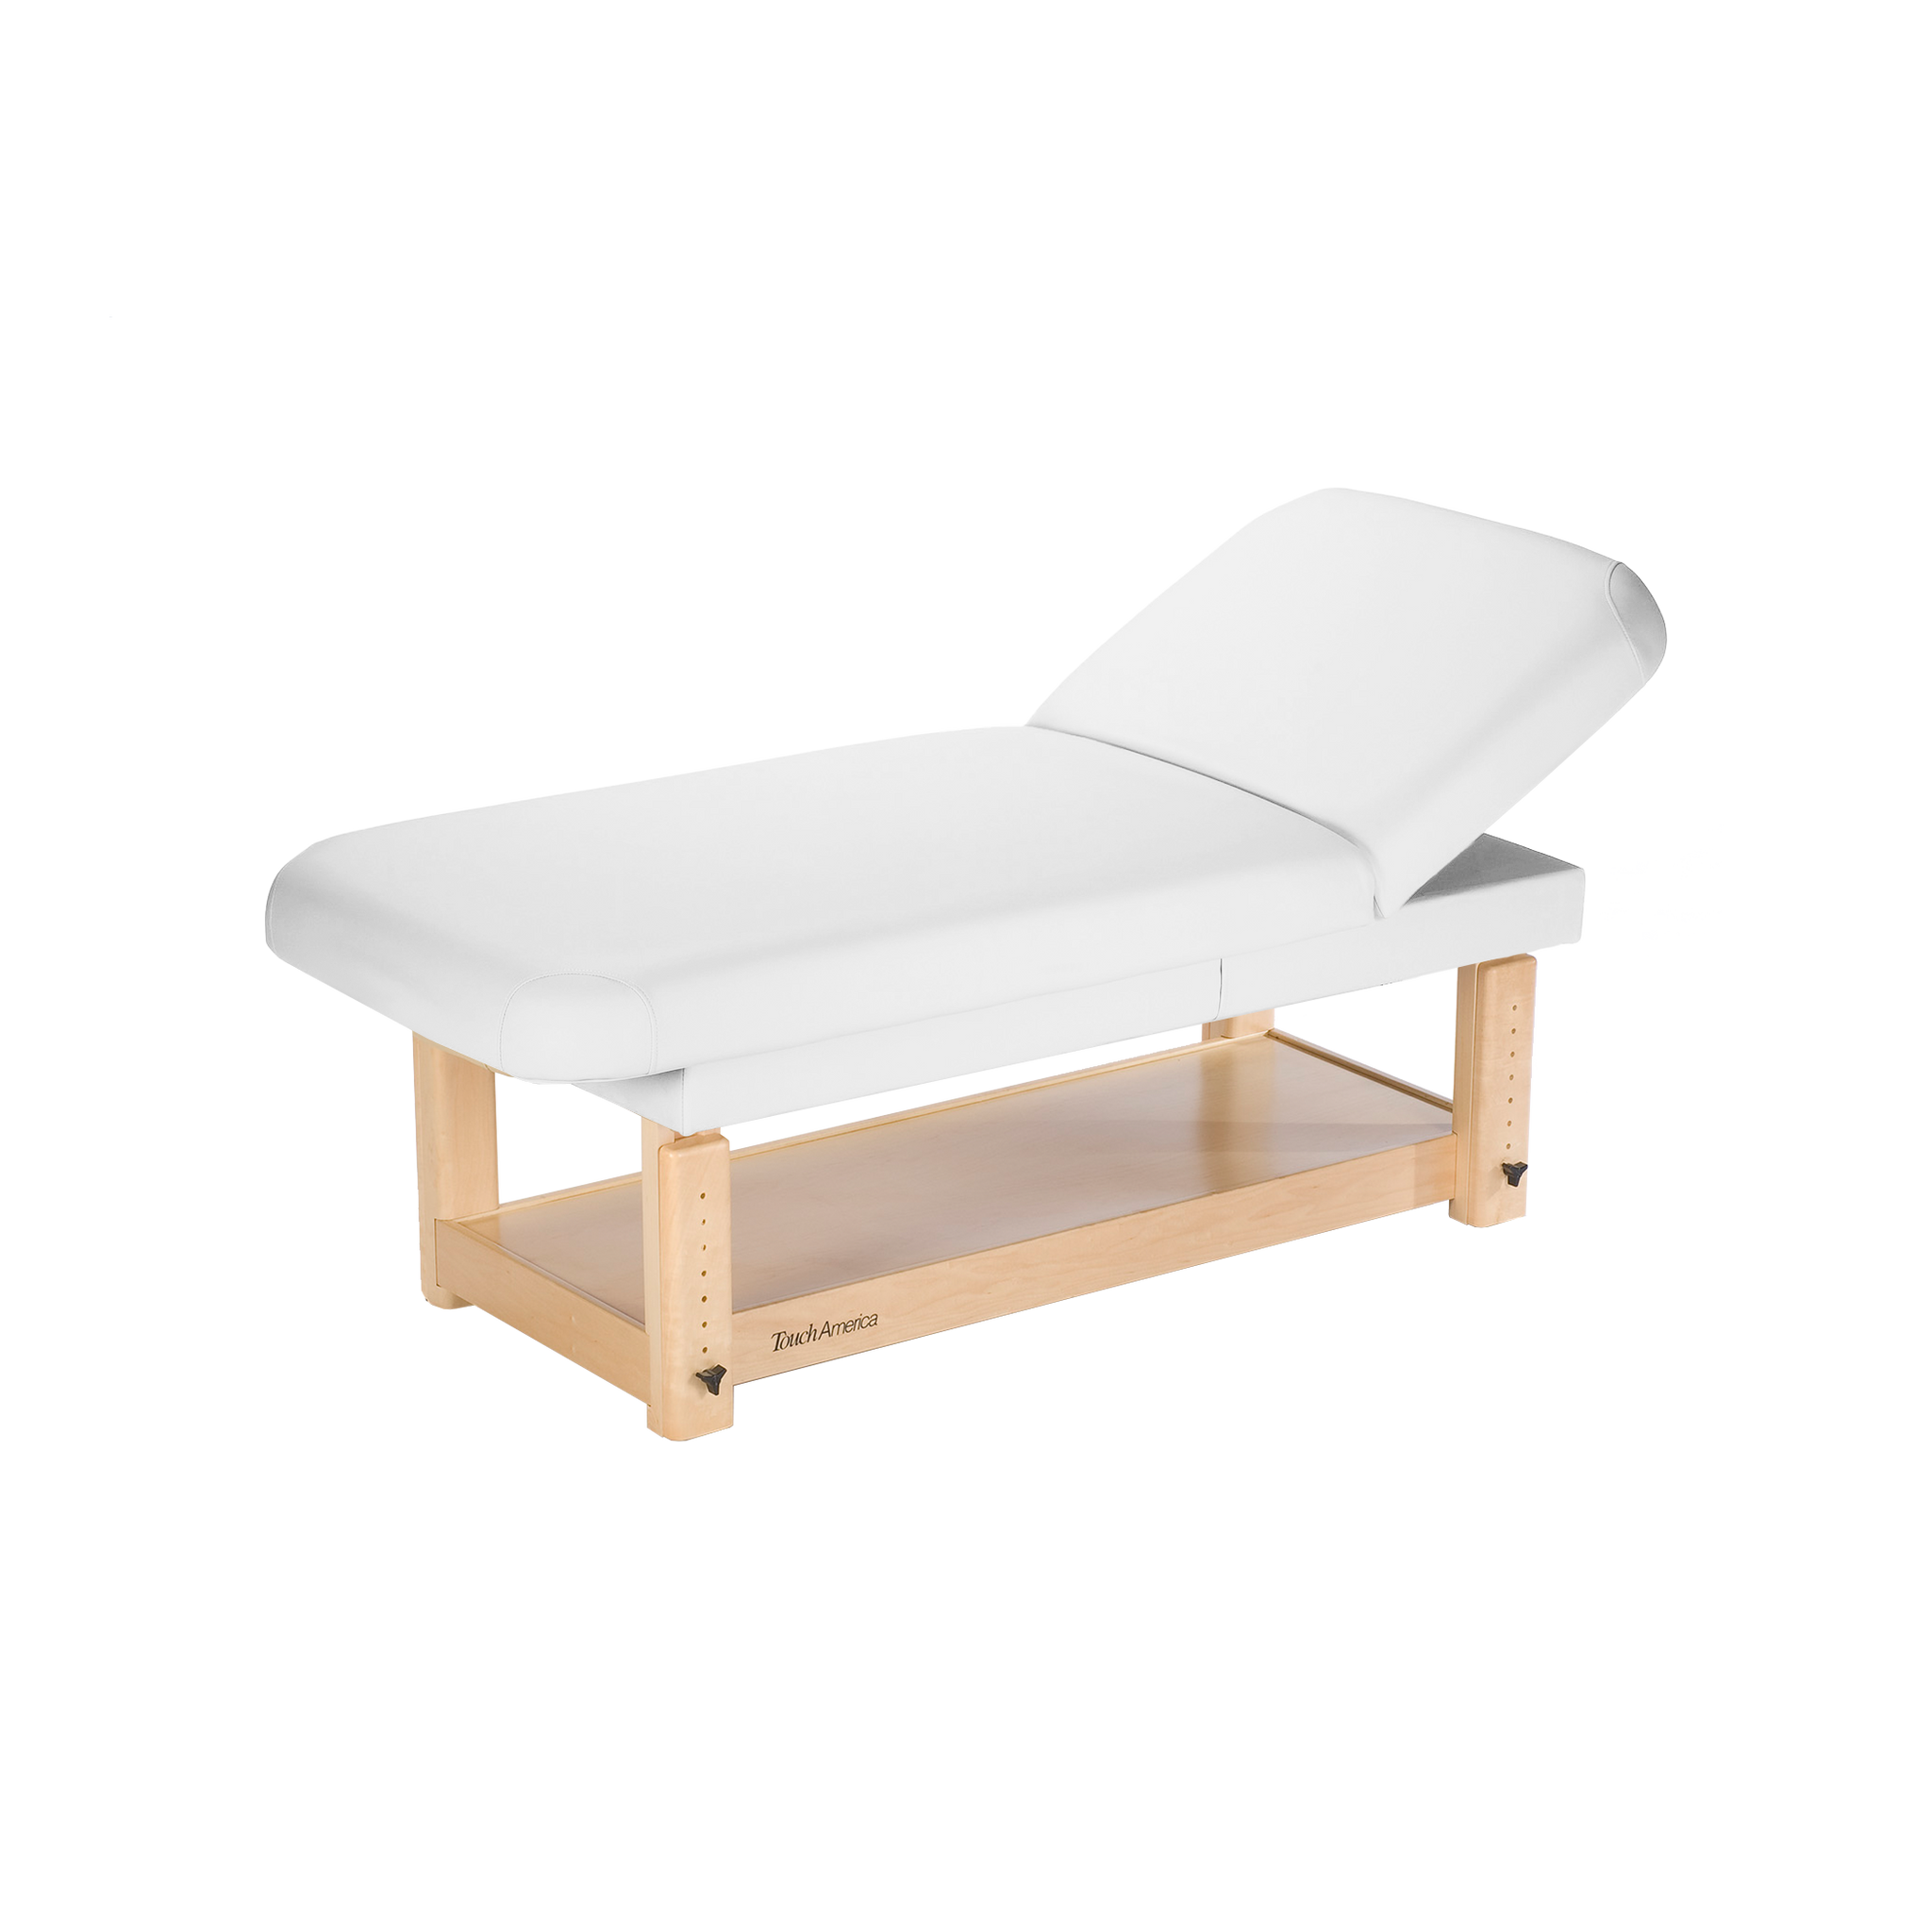 Stationary Spa and Massage Treatment Table